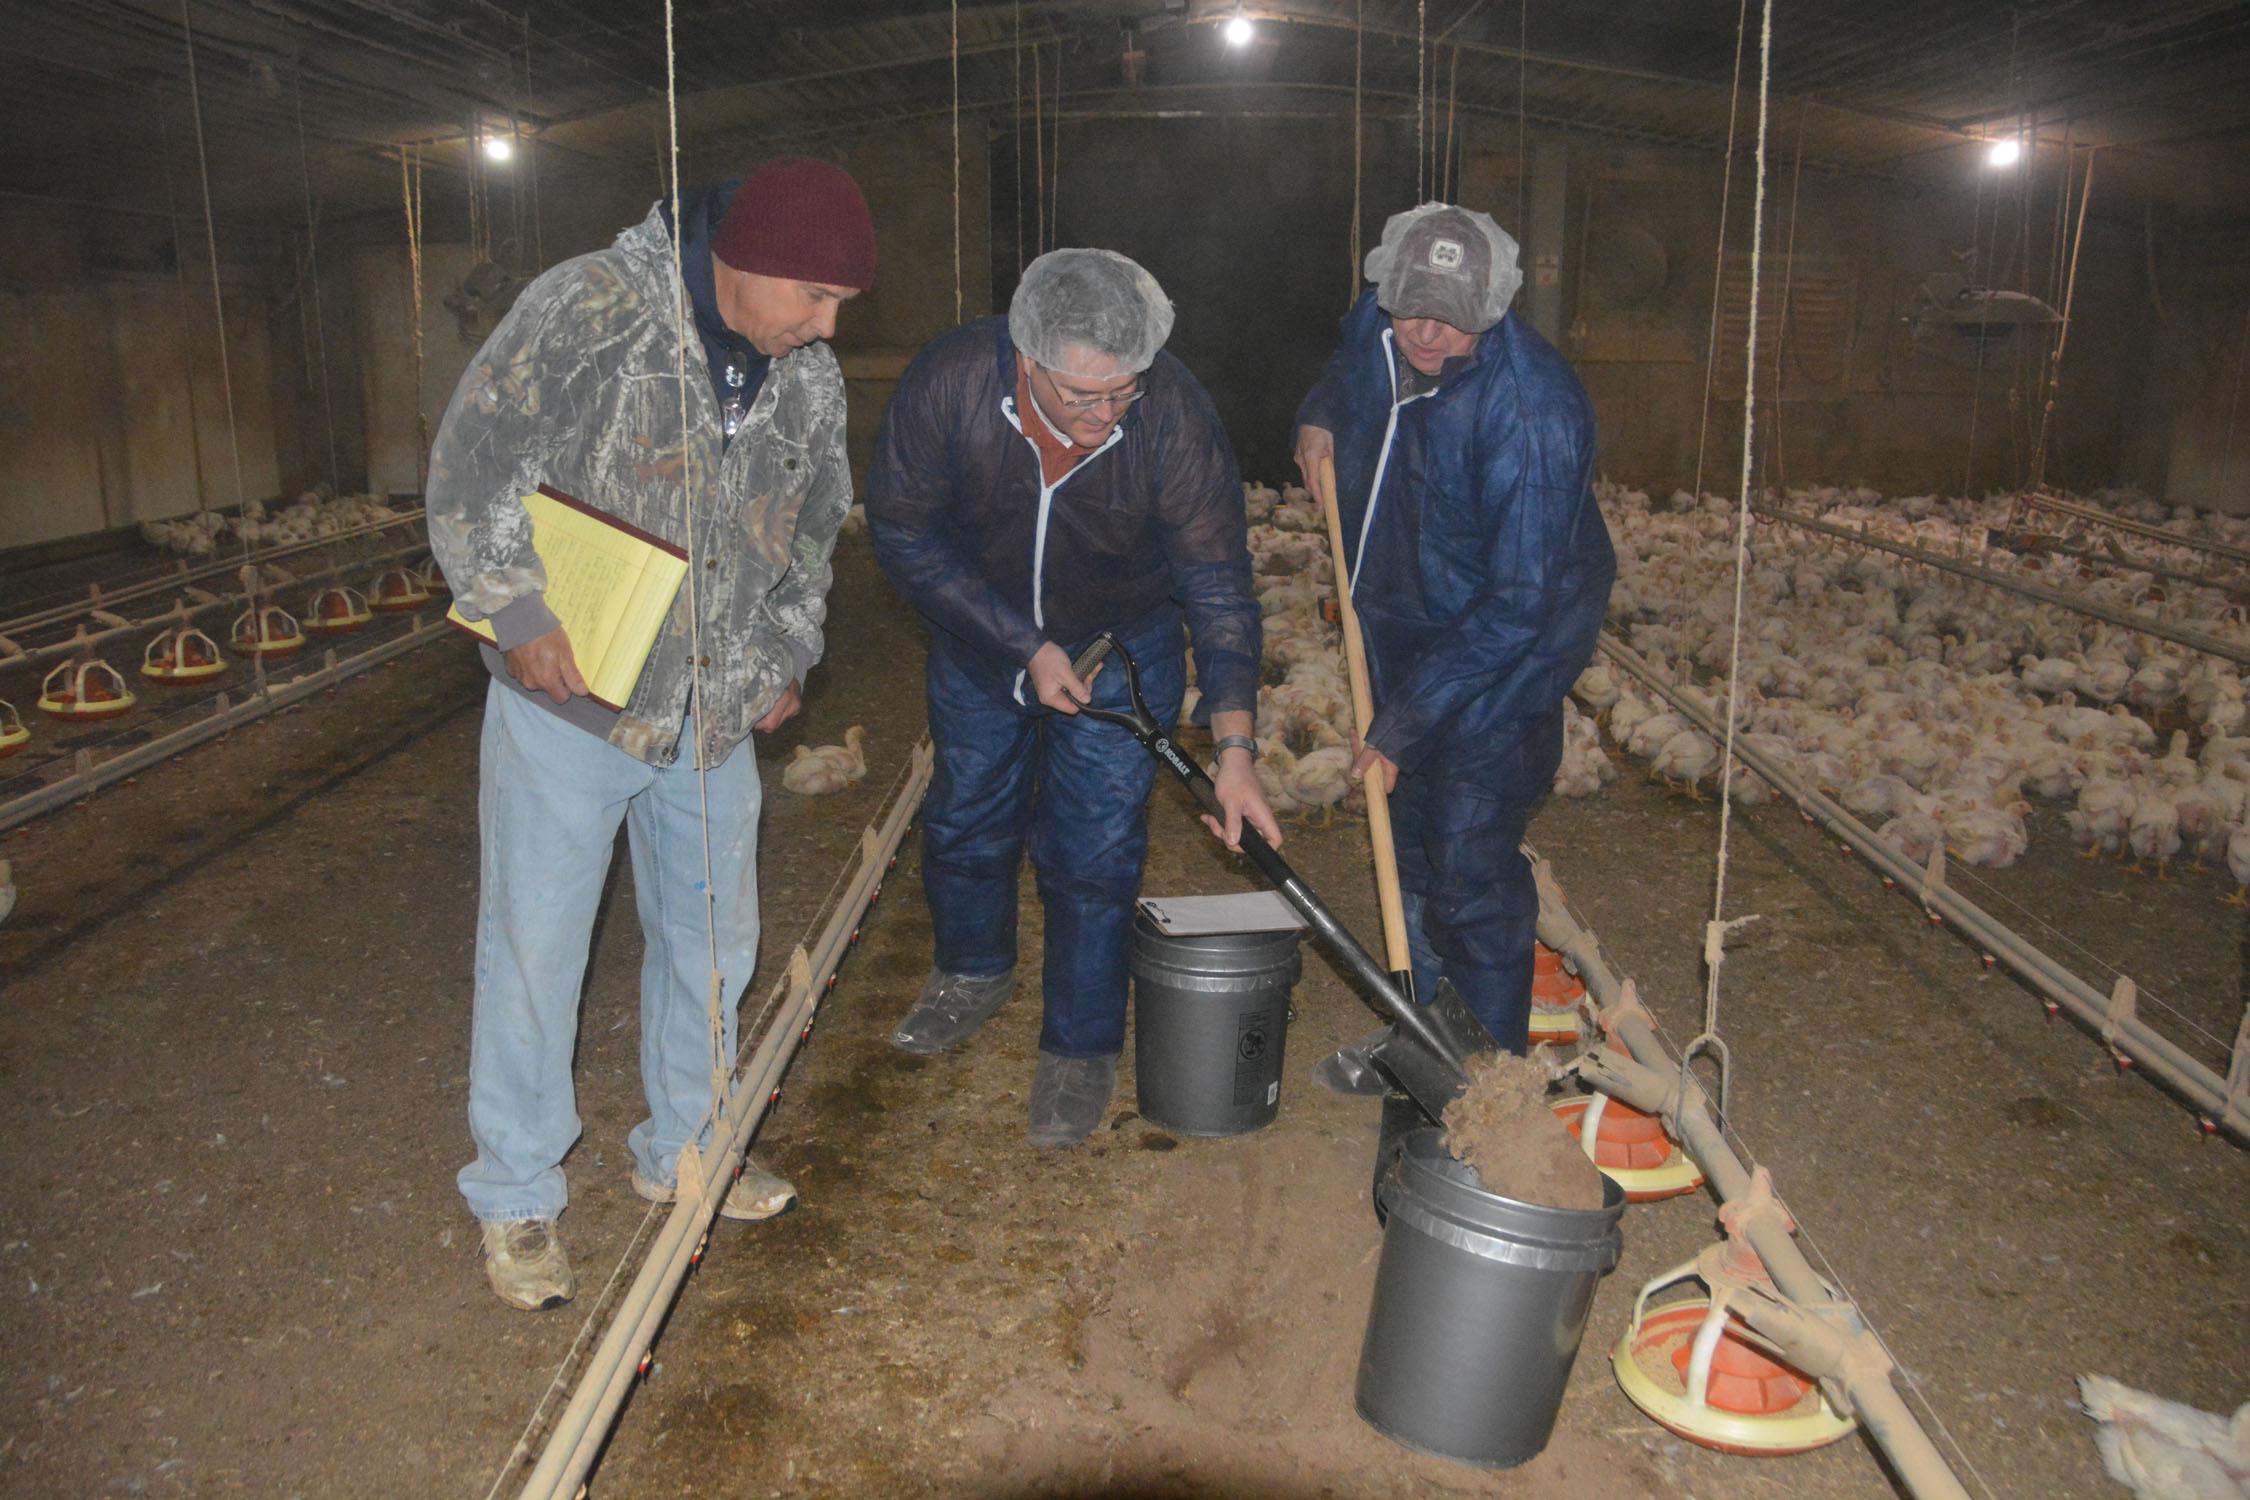 Okolona poultry grower Joe Ellis, left, watches as Mississippi State University poultry scientists Morgan Farnell, center, and Tom Tabler dig litter samples from the floor of one of his broiler houses on March 6, 2014. MSU researchers are collecting samples from houses across the state to update fertility data. (Photo by MSU Ag Communications/Linda Breazeale)